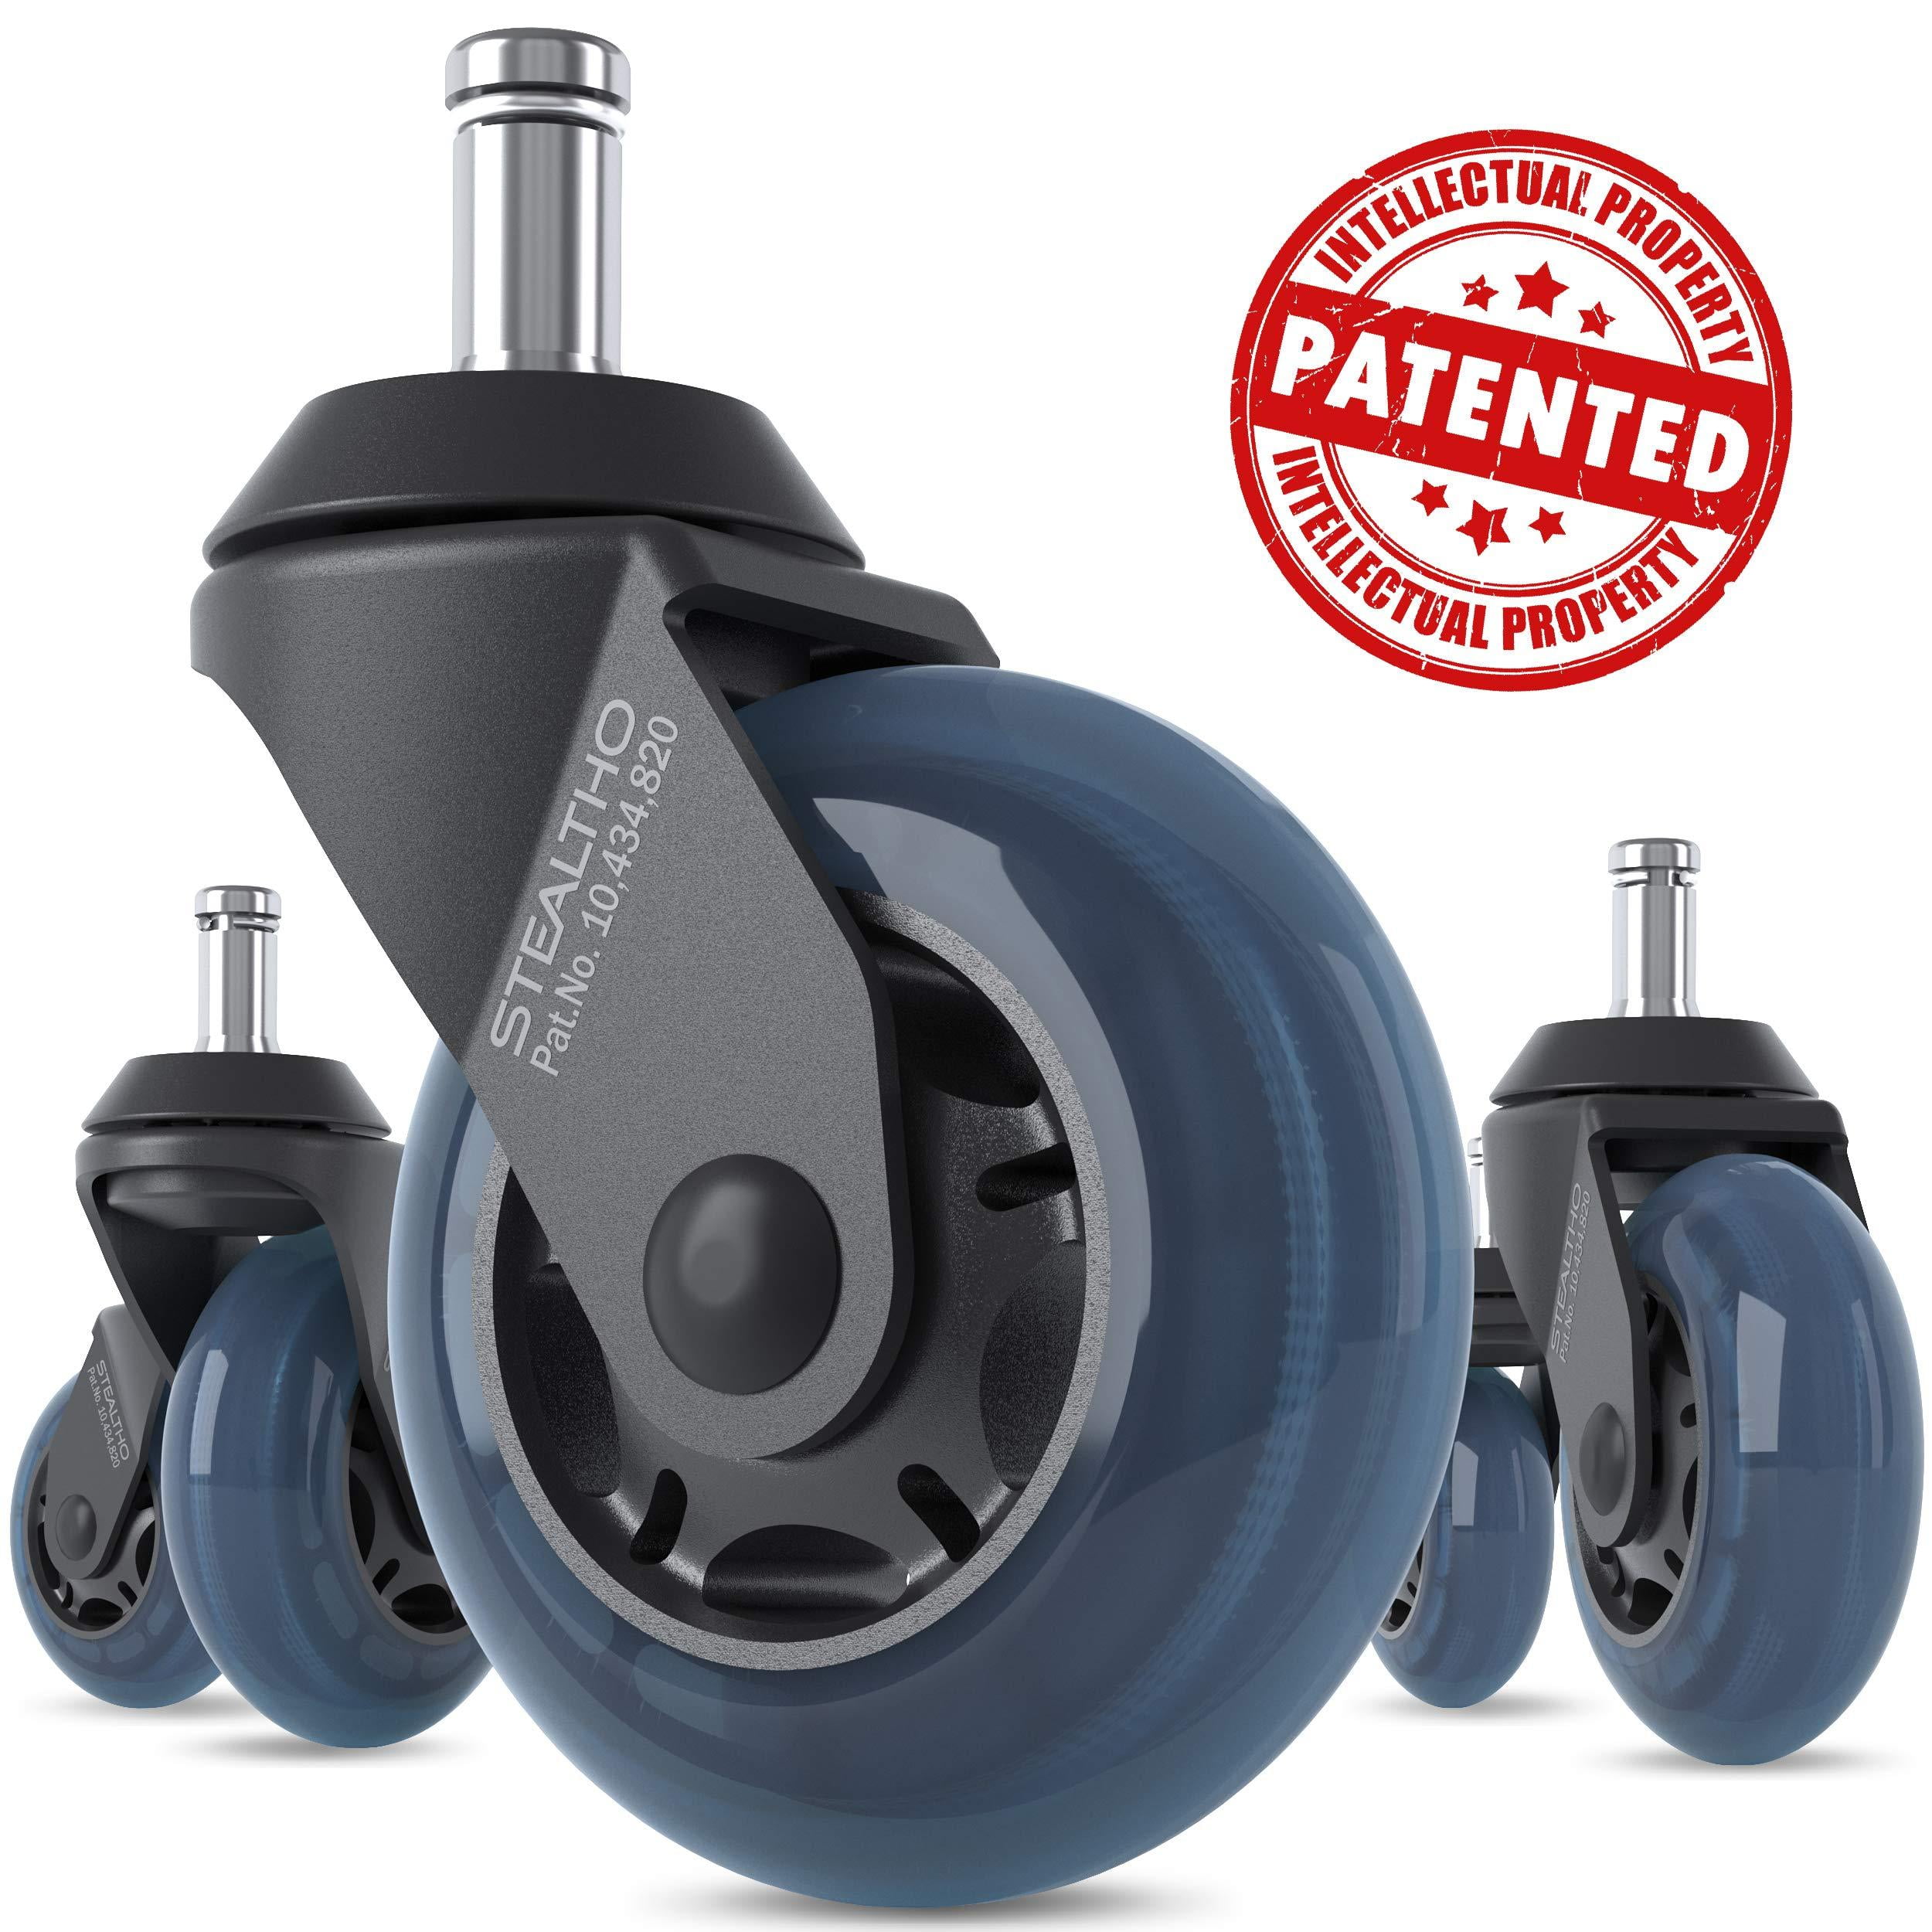 Staples Set of 5 Soft Wheels Chair Casters for Hard Surfaces & Chairmats NEW 